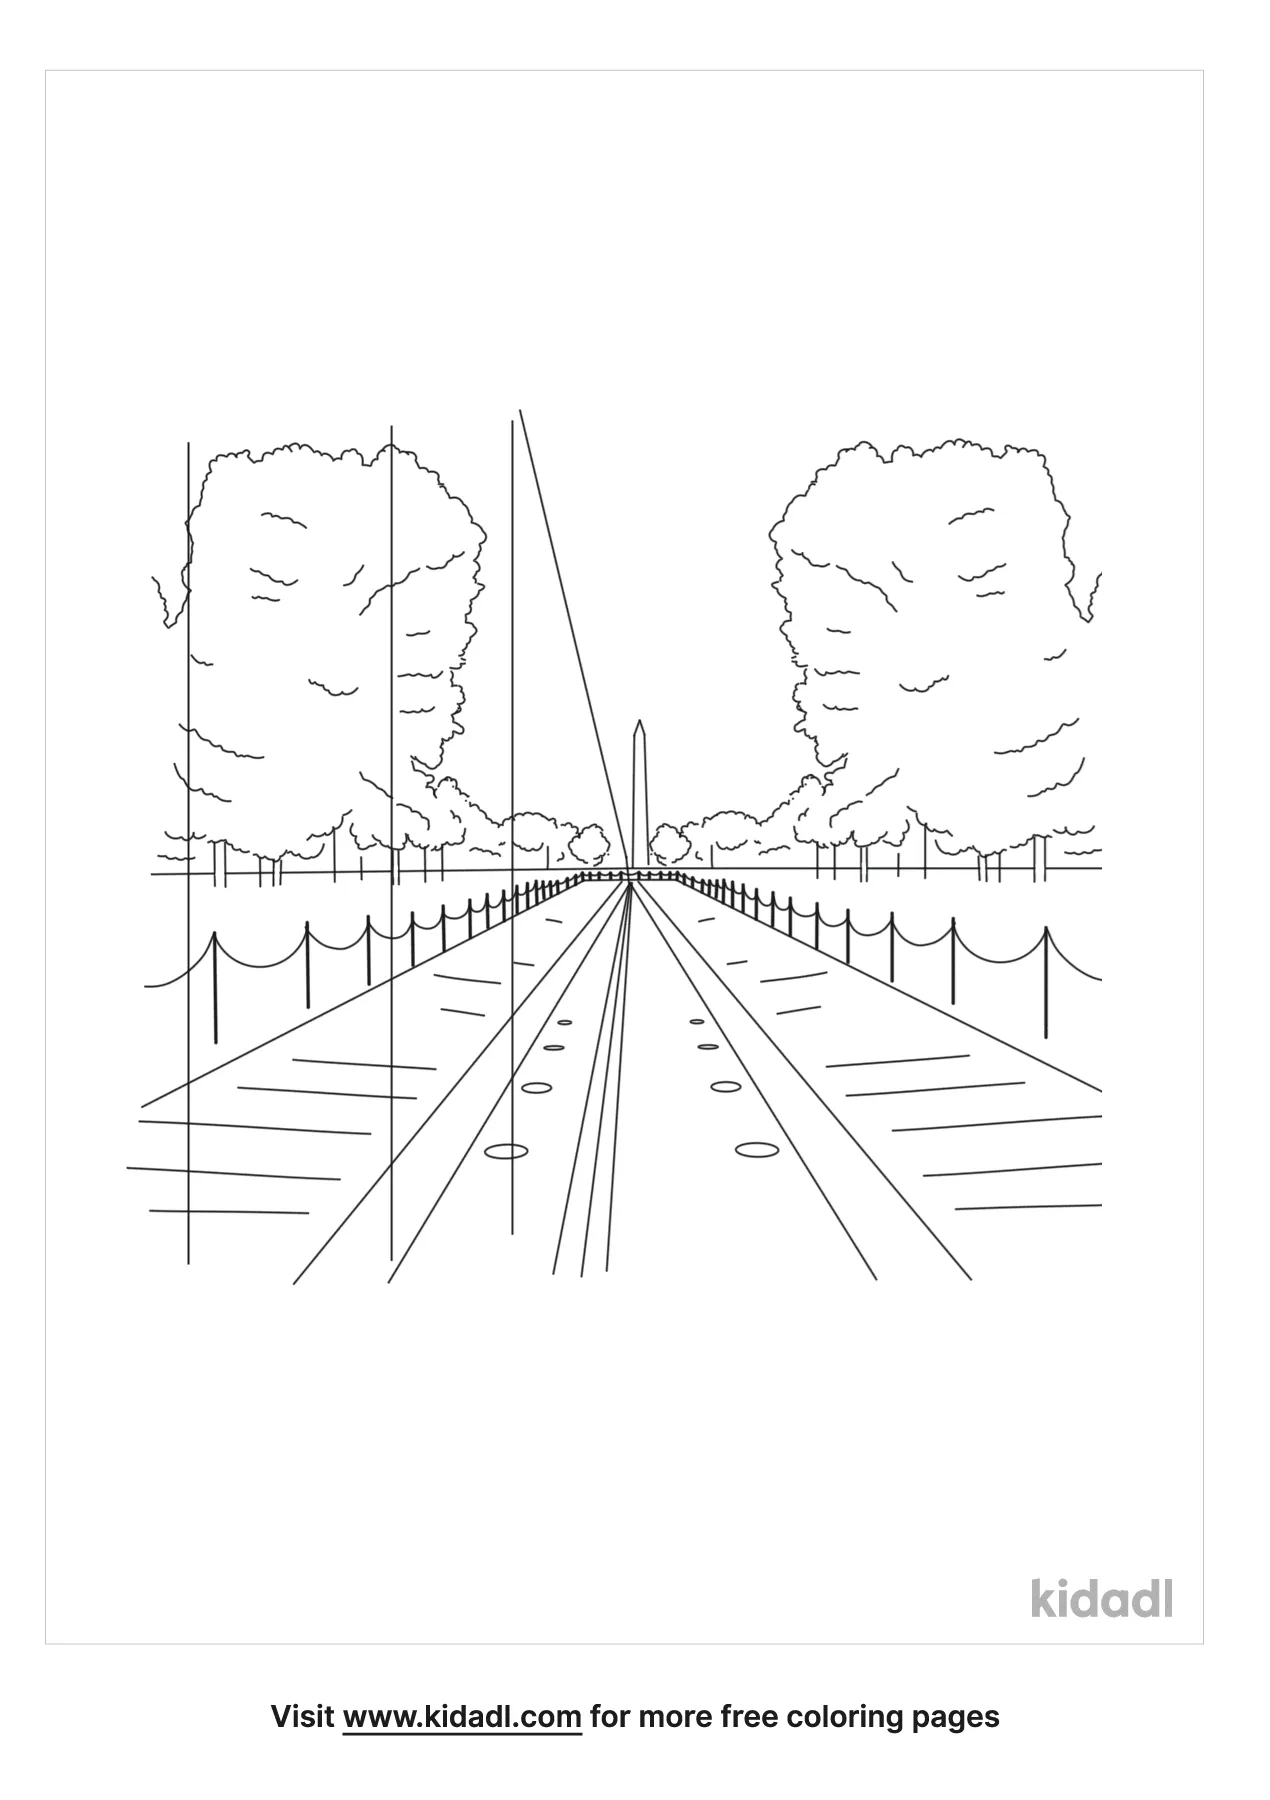 Memorial-day Coloring Pages | Coloring Pages | Kidadl